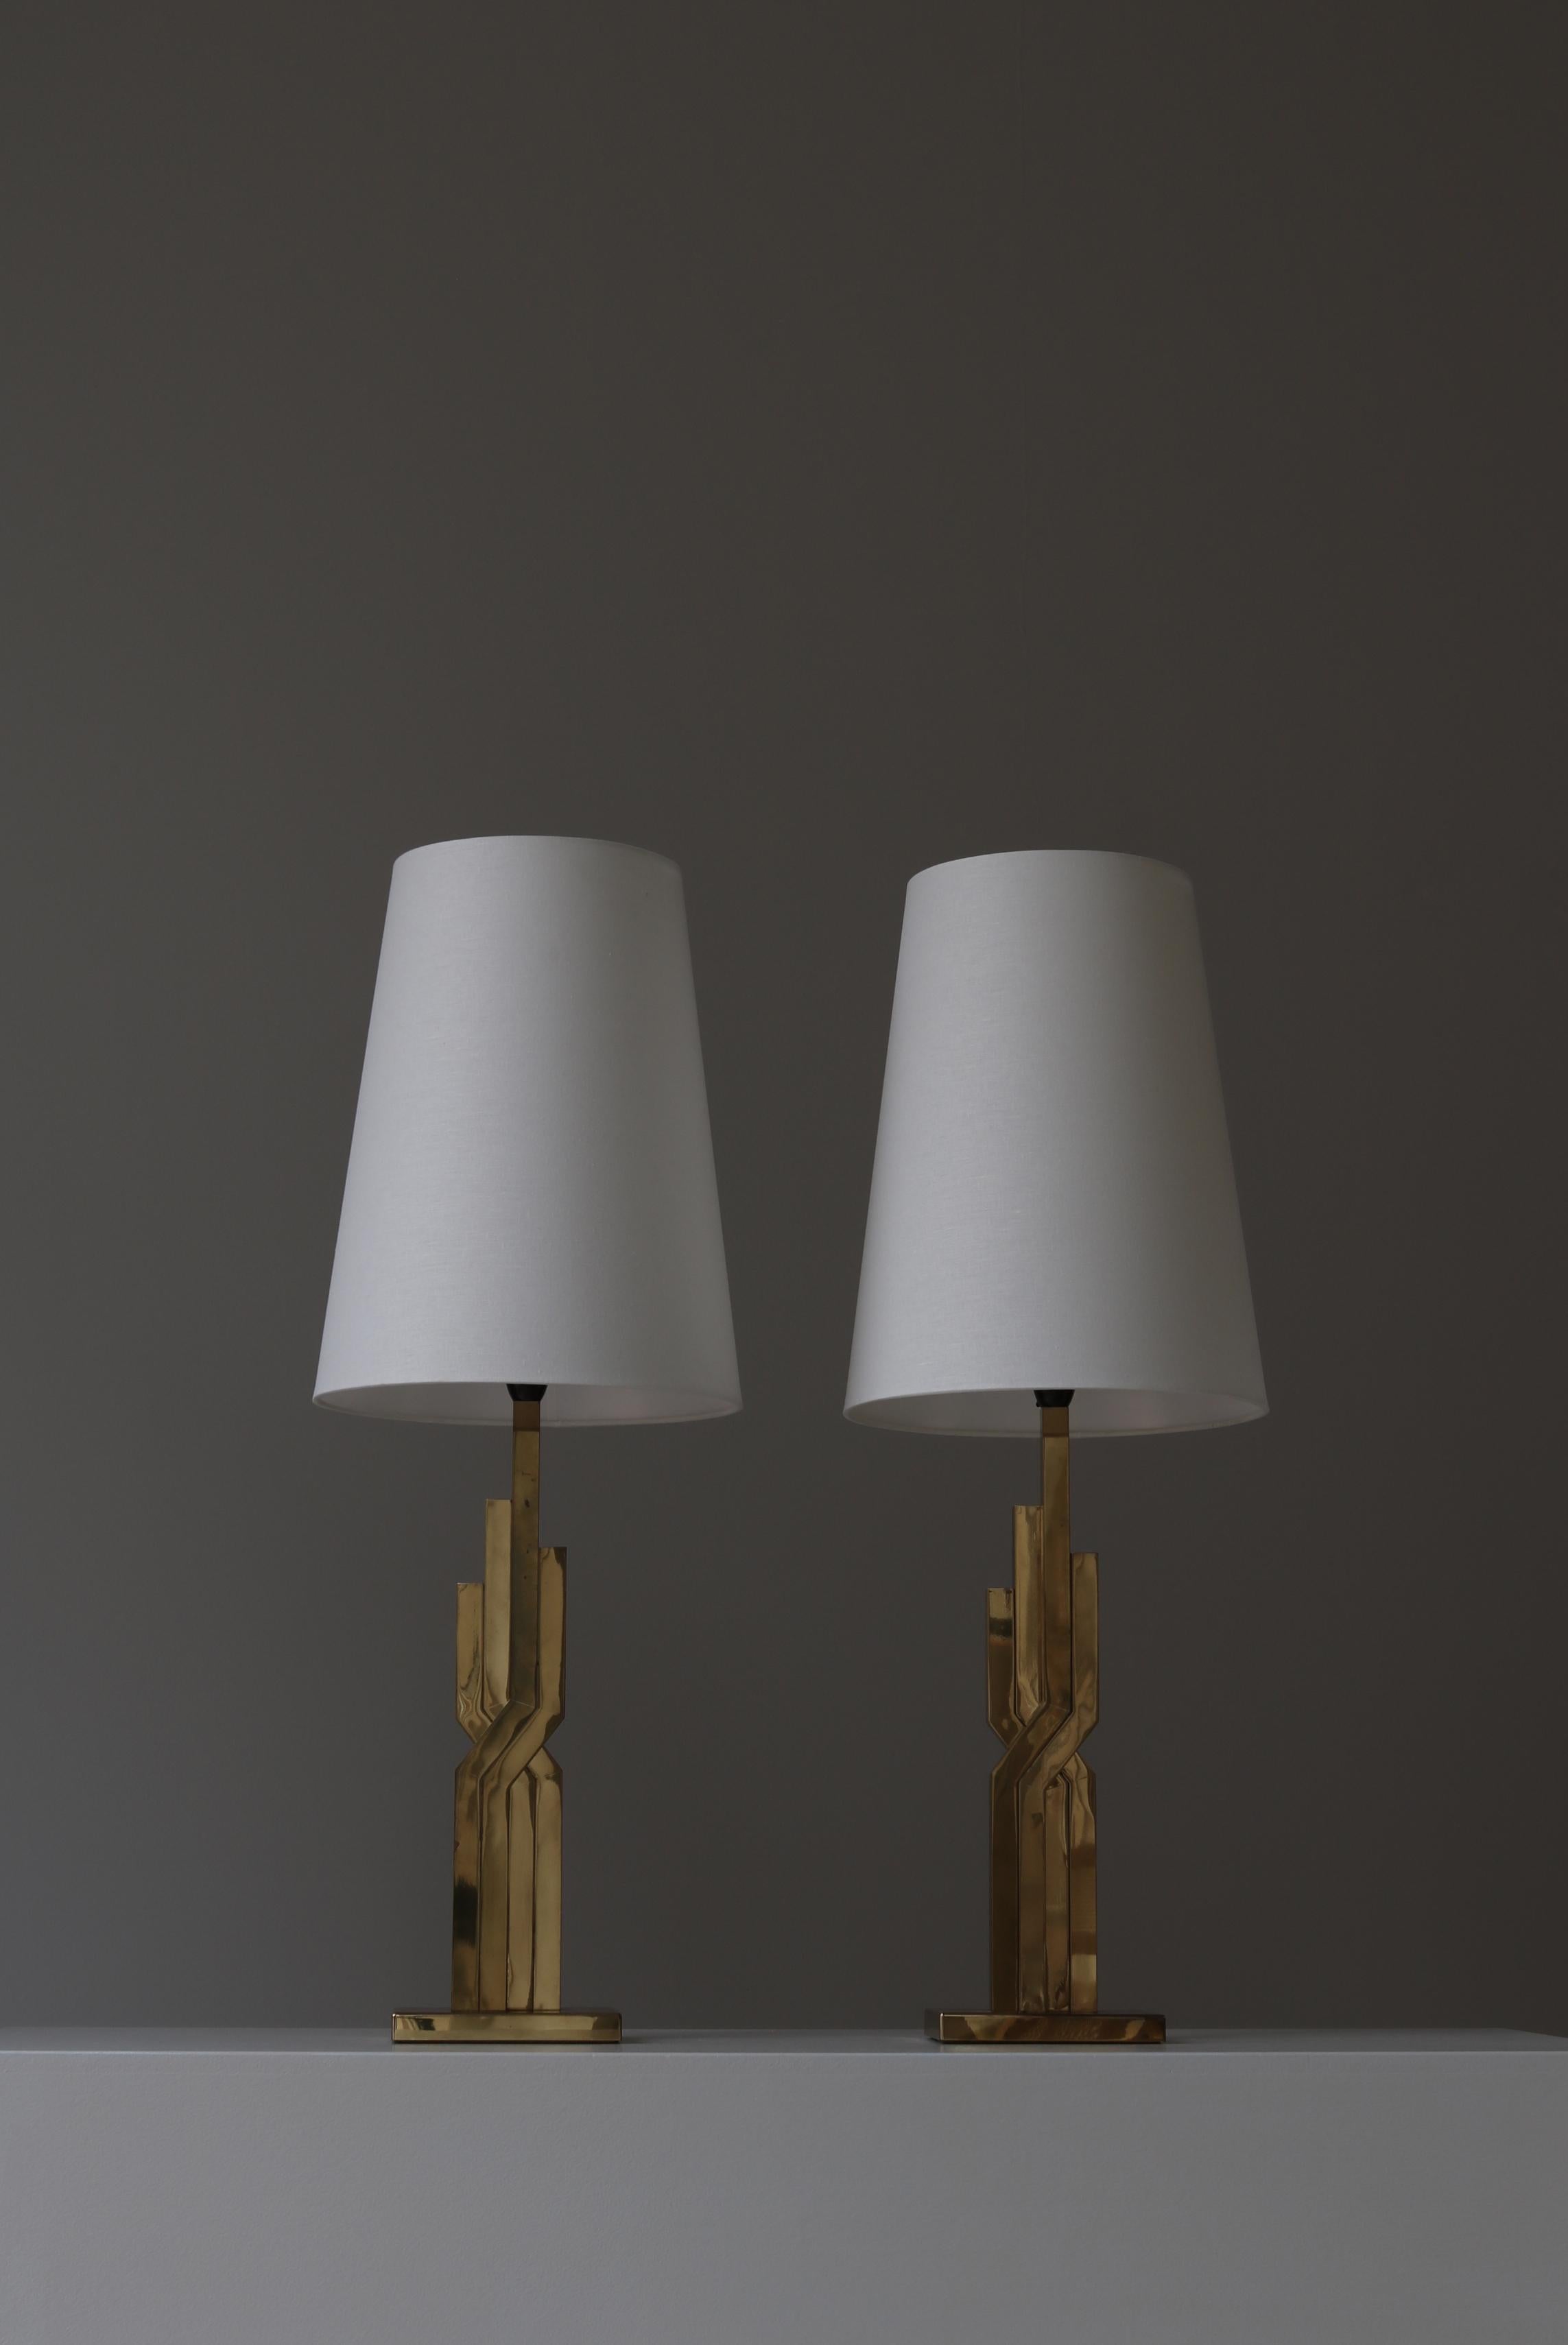 Large Danish Modern Table Lamps in Brass by Svend Aage Holm-Sørensen, 1960s For Sale 4